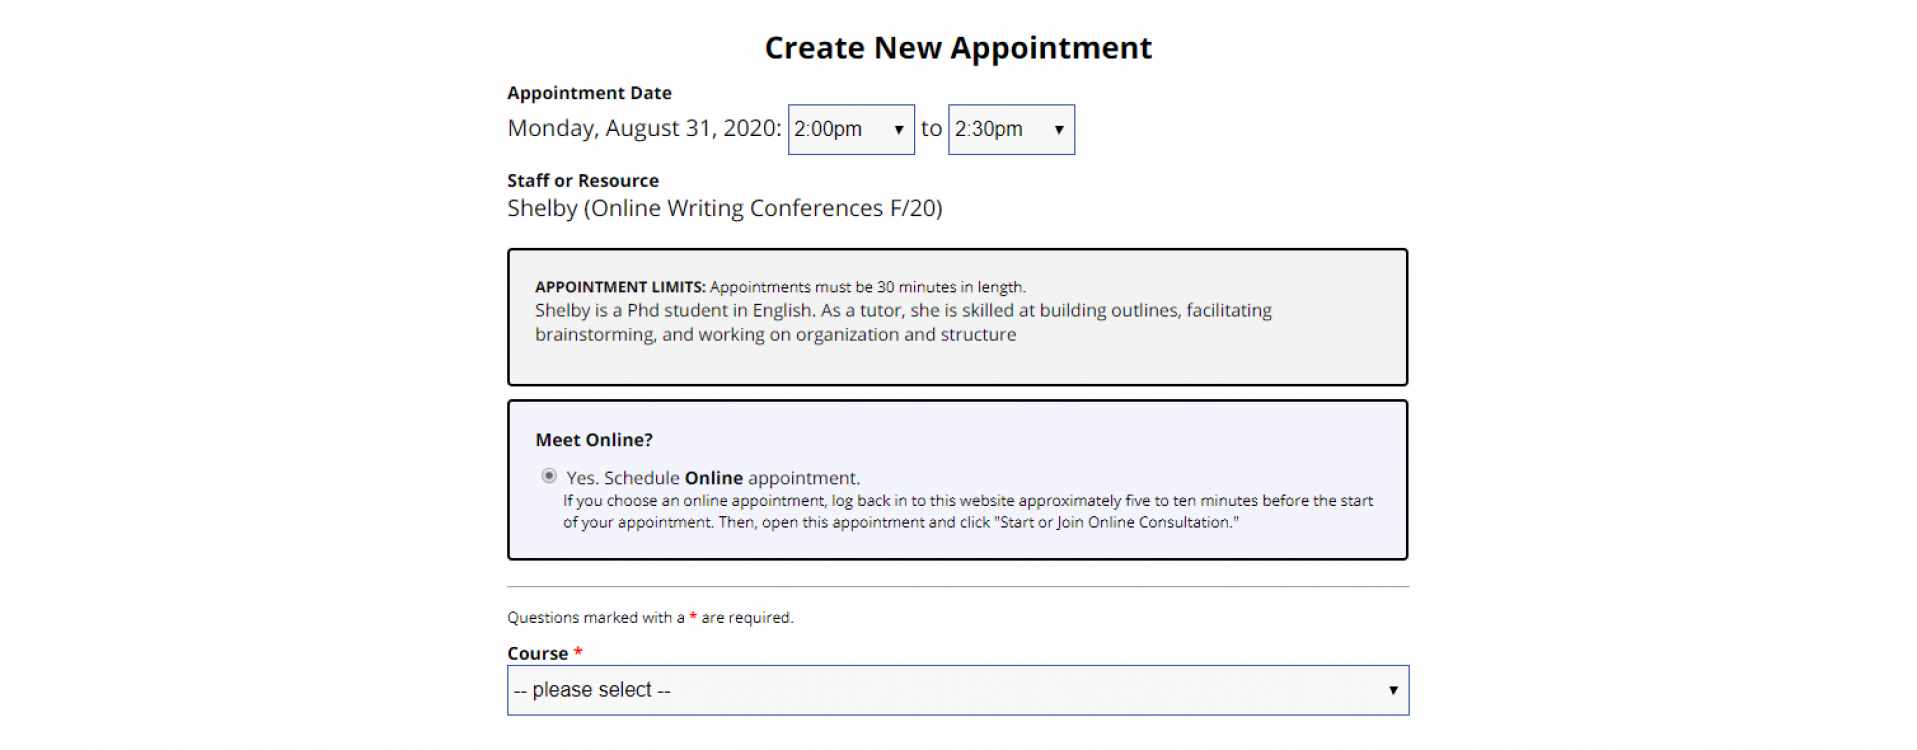 An image of an appointment form for the Online Writing Conferences Schedule.